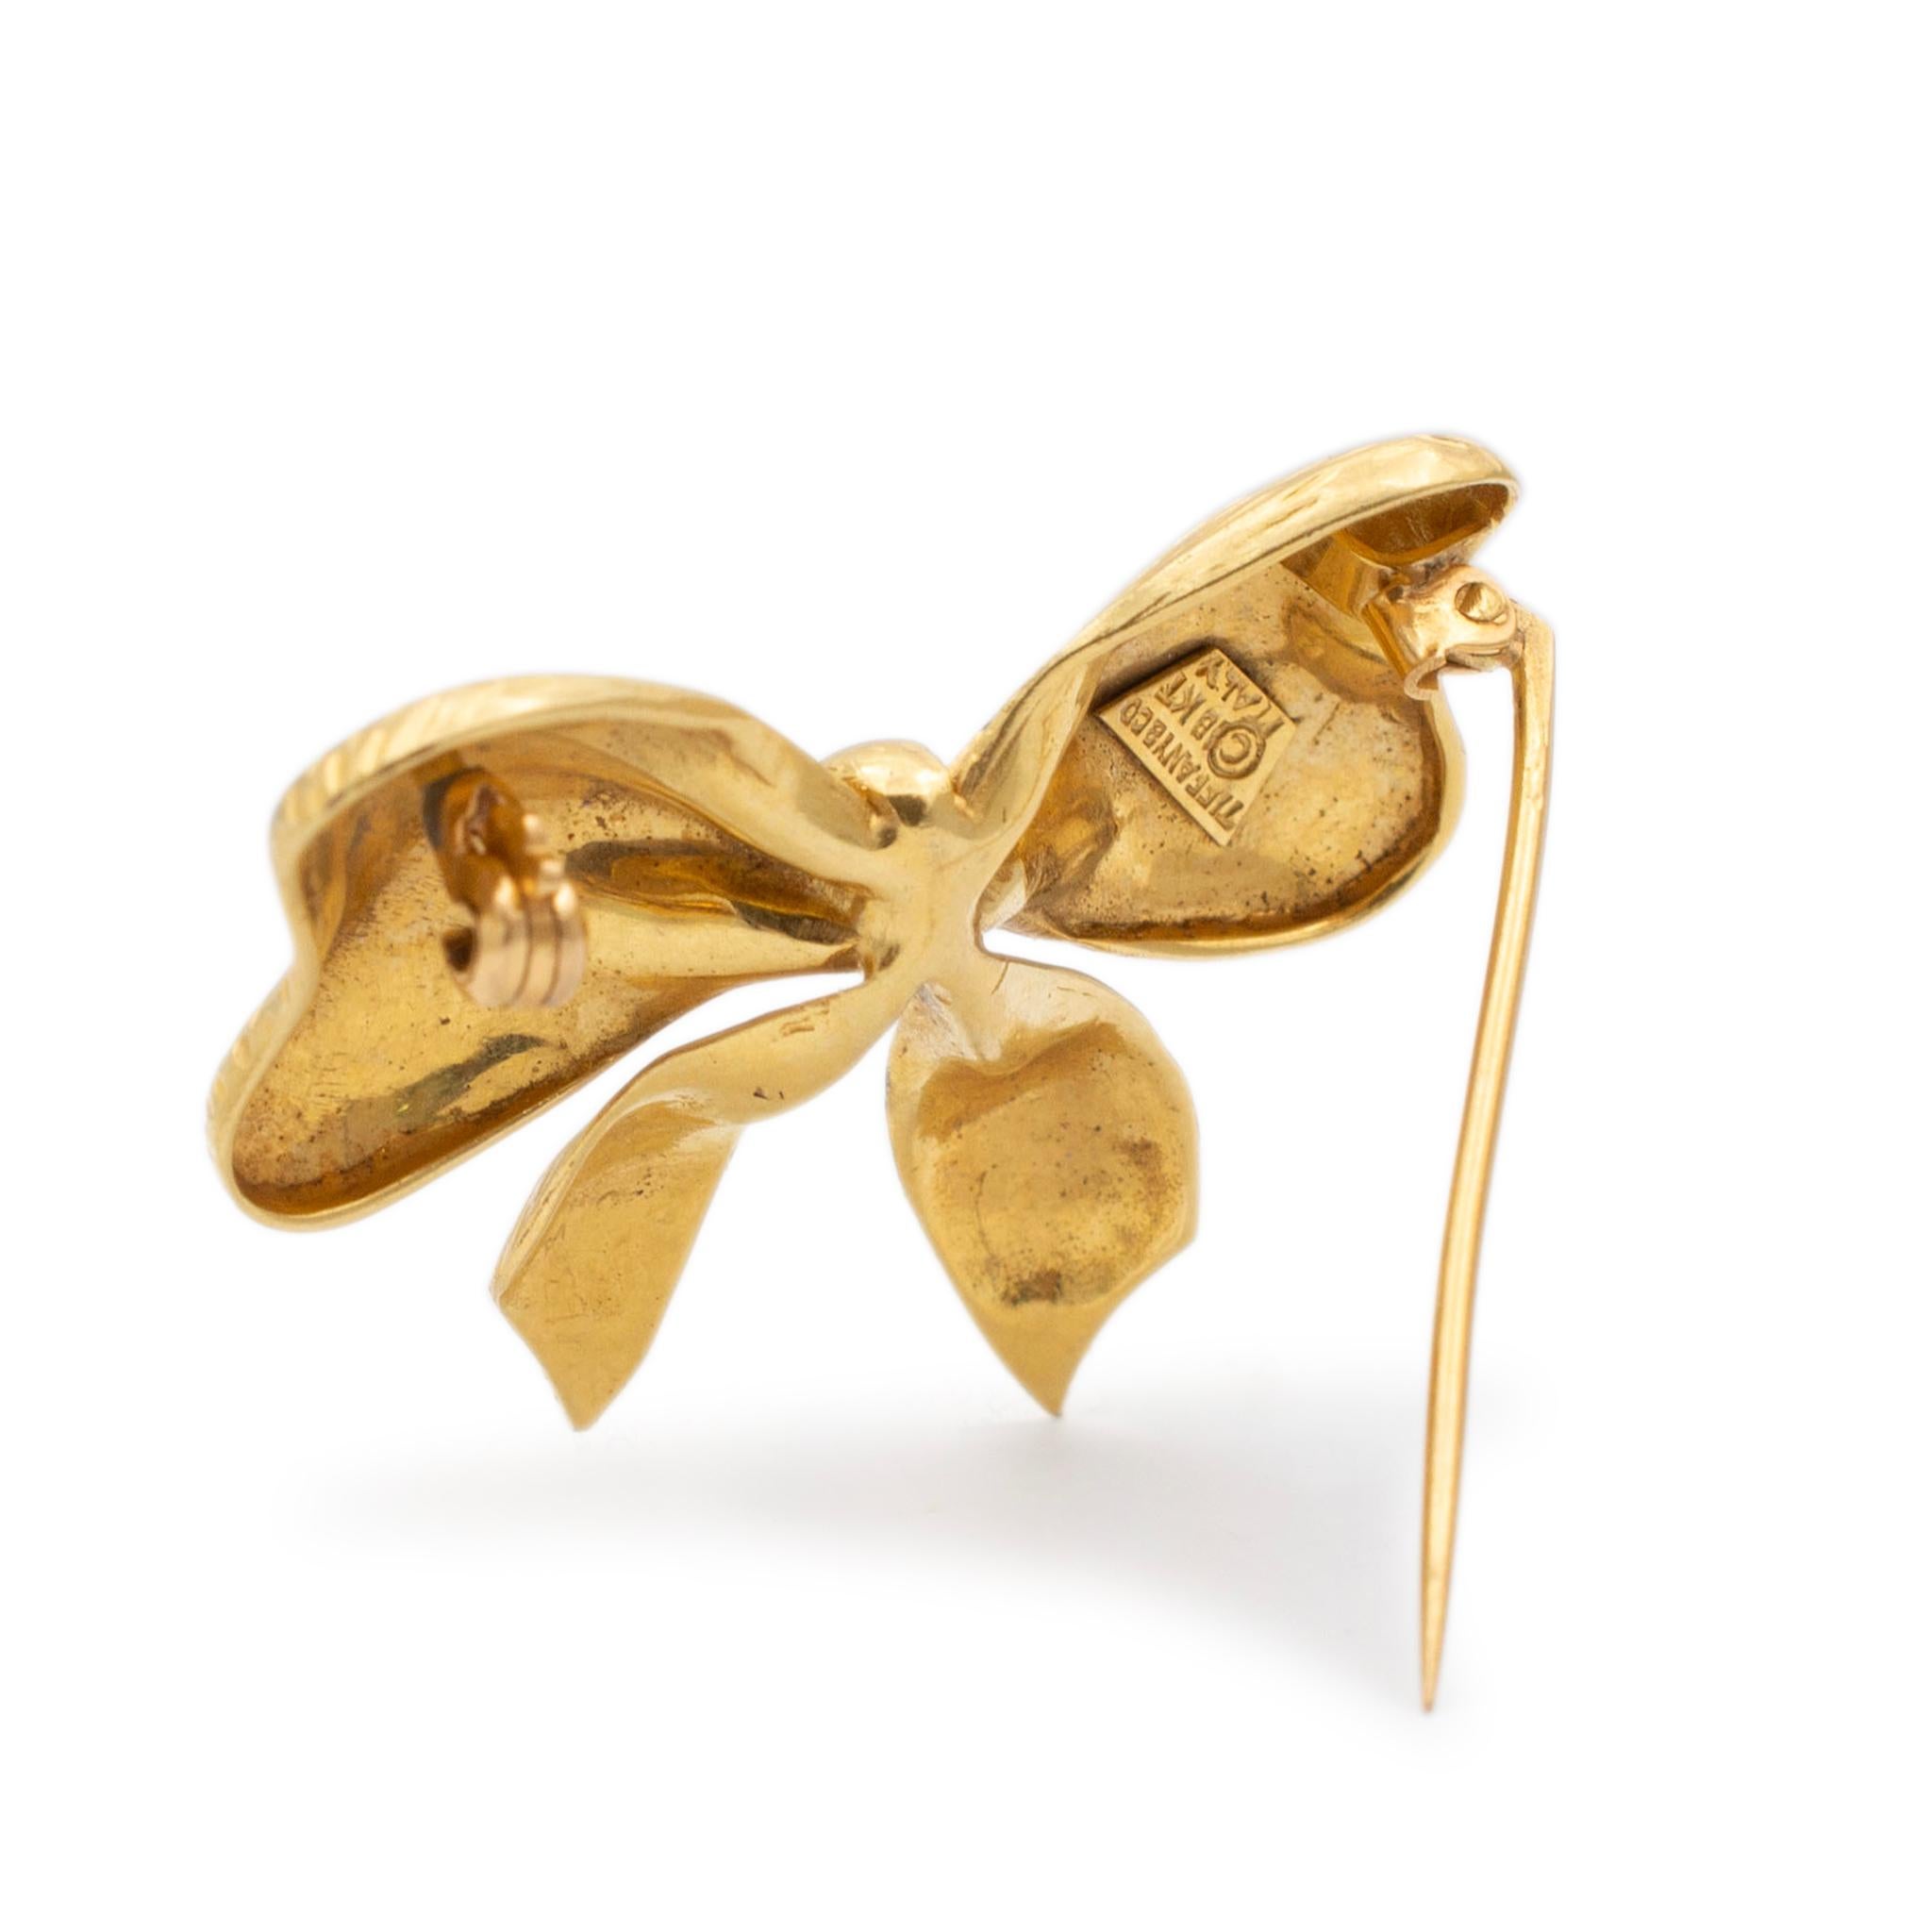 Gender: Unisex

Metal Type: 18K Yellow Gold

Length: 1.25 inches

Width: 35.00 mm

Weight: 8.50 grams

Designer made 18K yellow gold bow, vintage brooch. Engraved with 